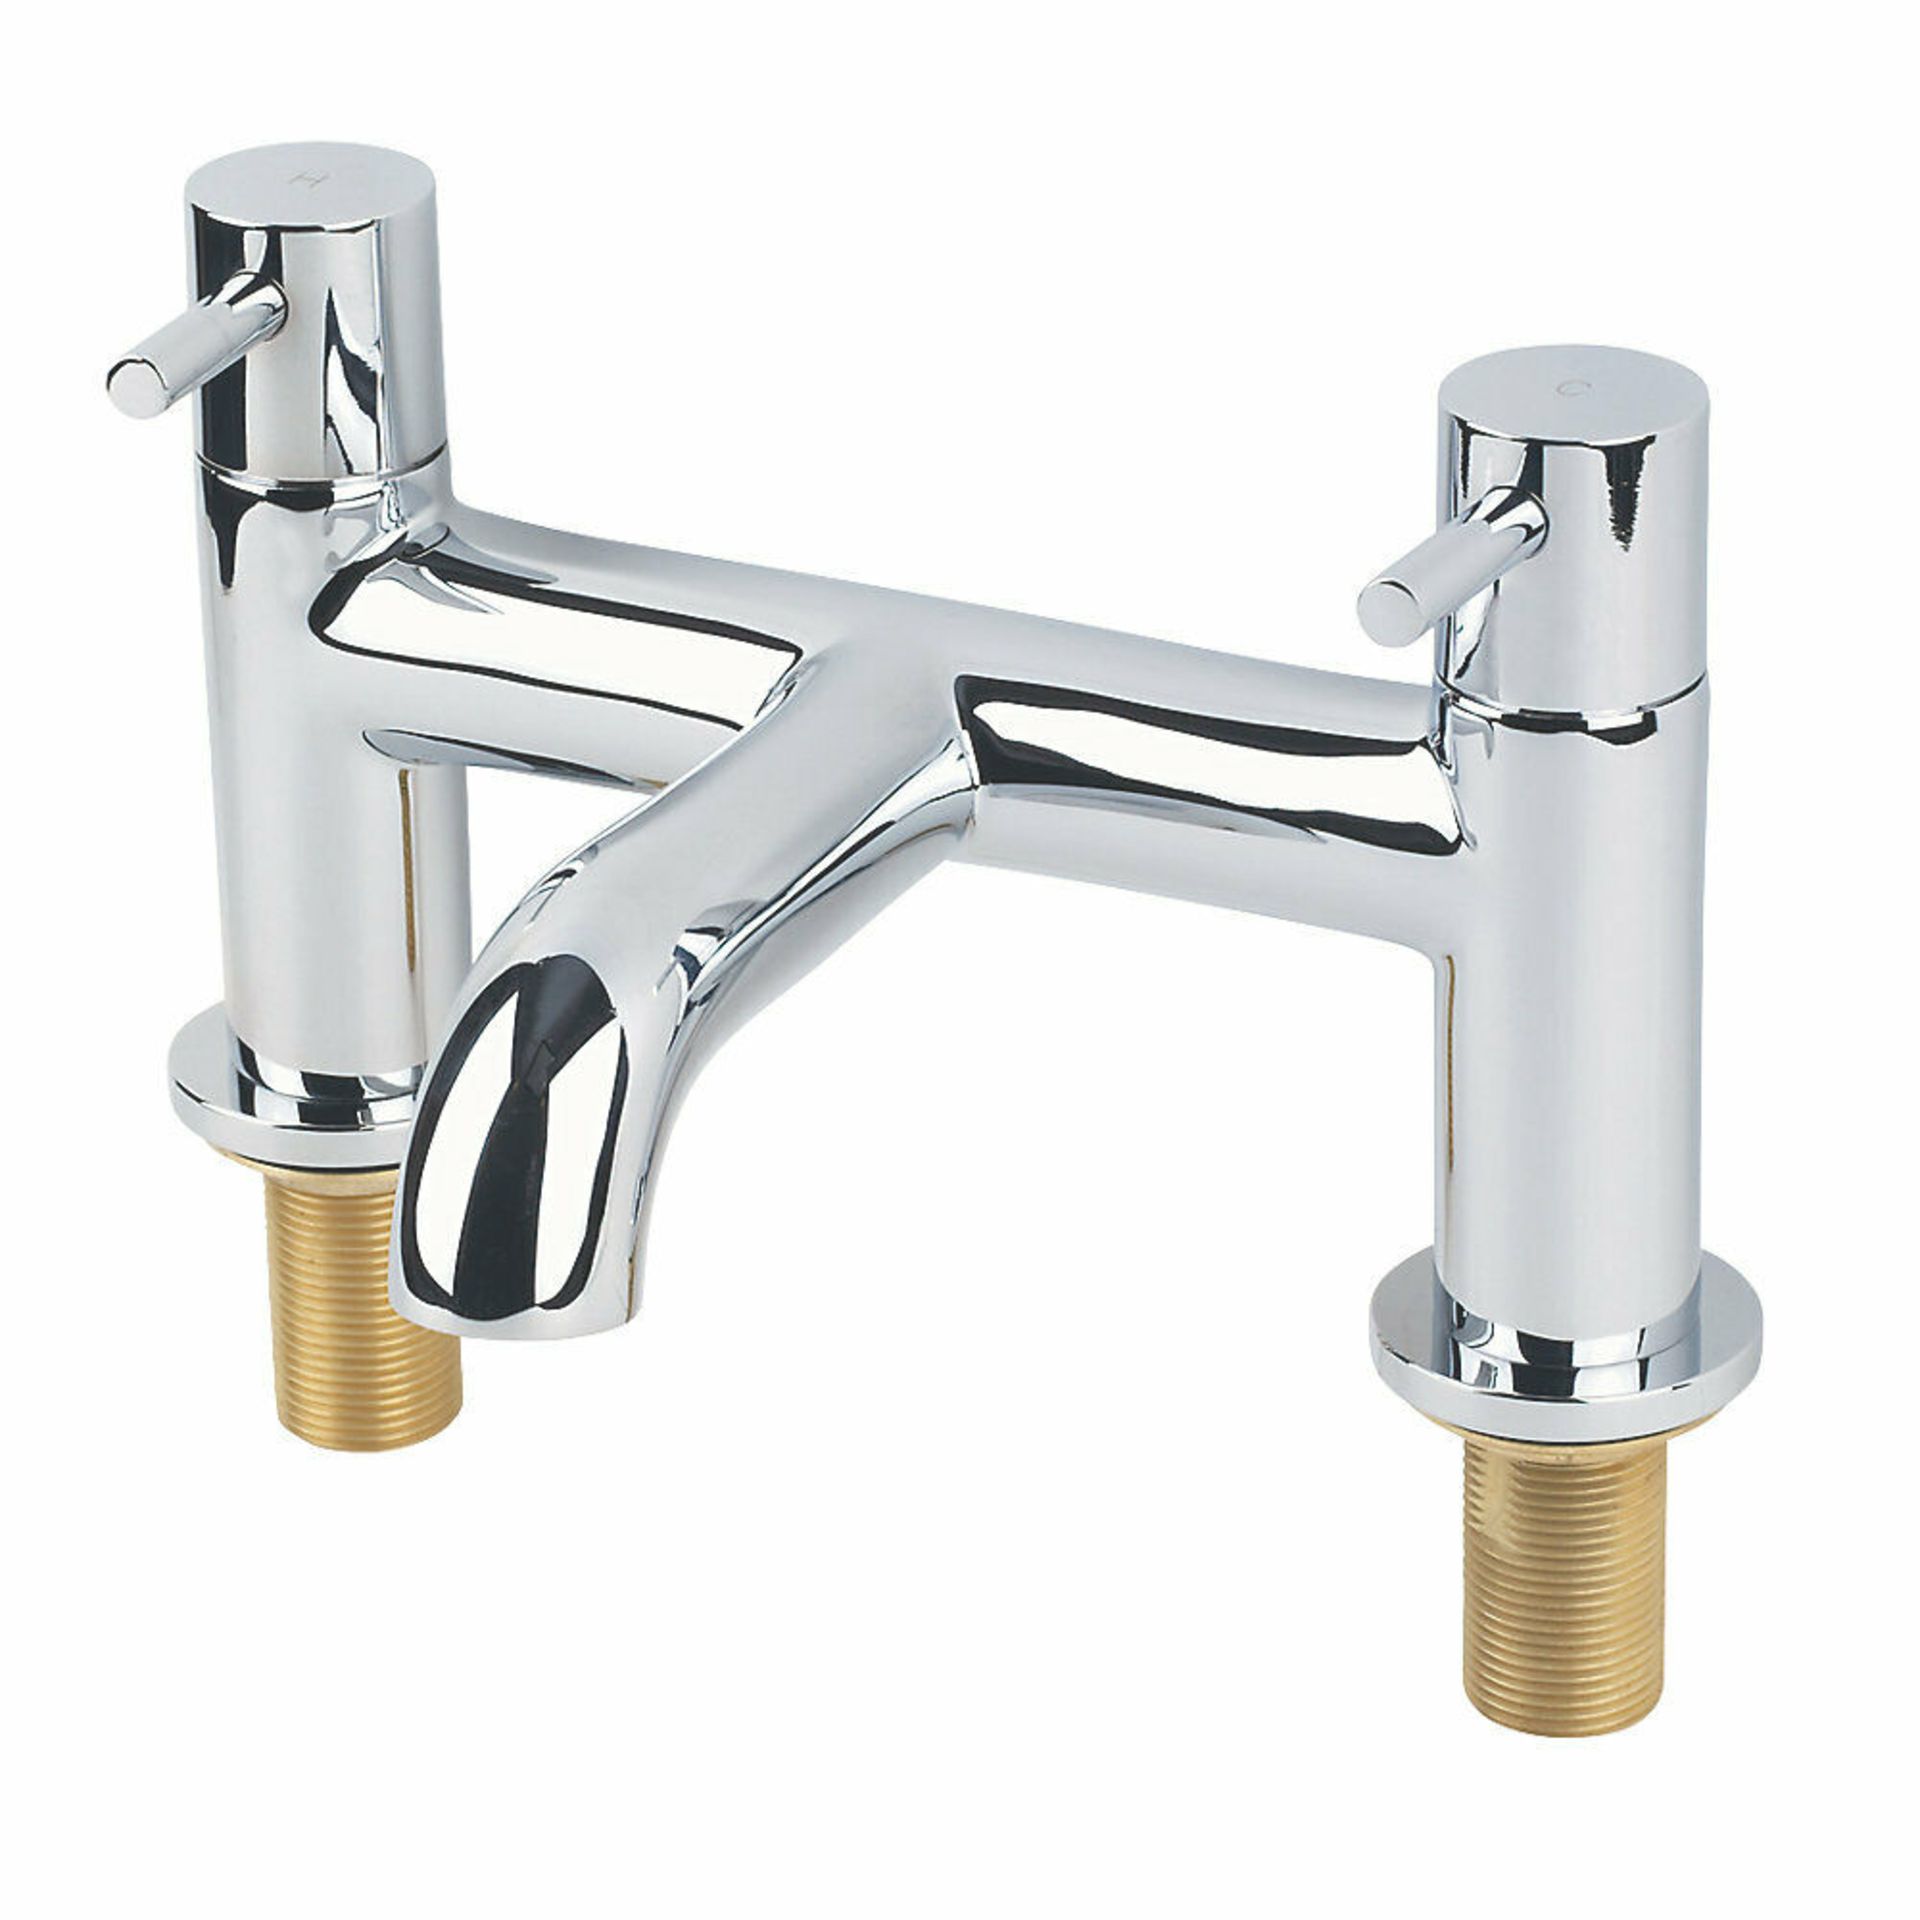 (XX127) Swirl Ola Bath Filler Tap Deck Mounted Mixer Chrome. _ Turn Operation Suitable for Hi...